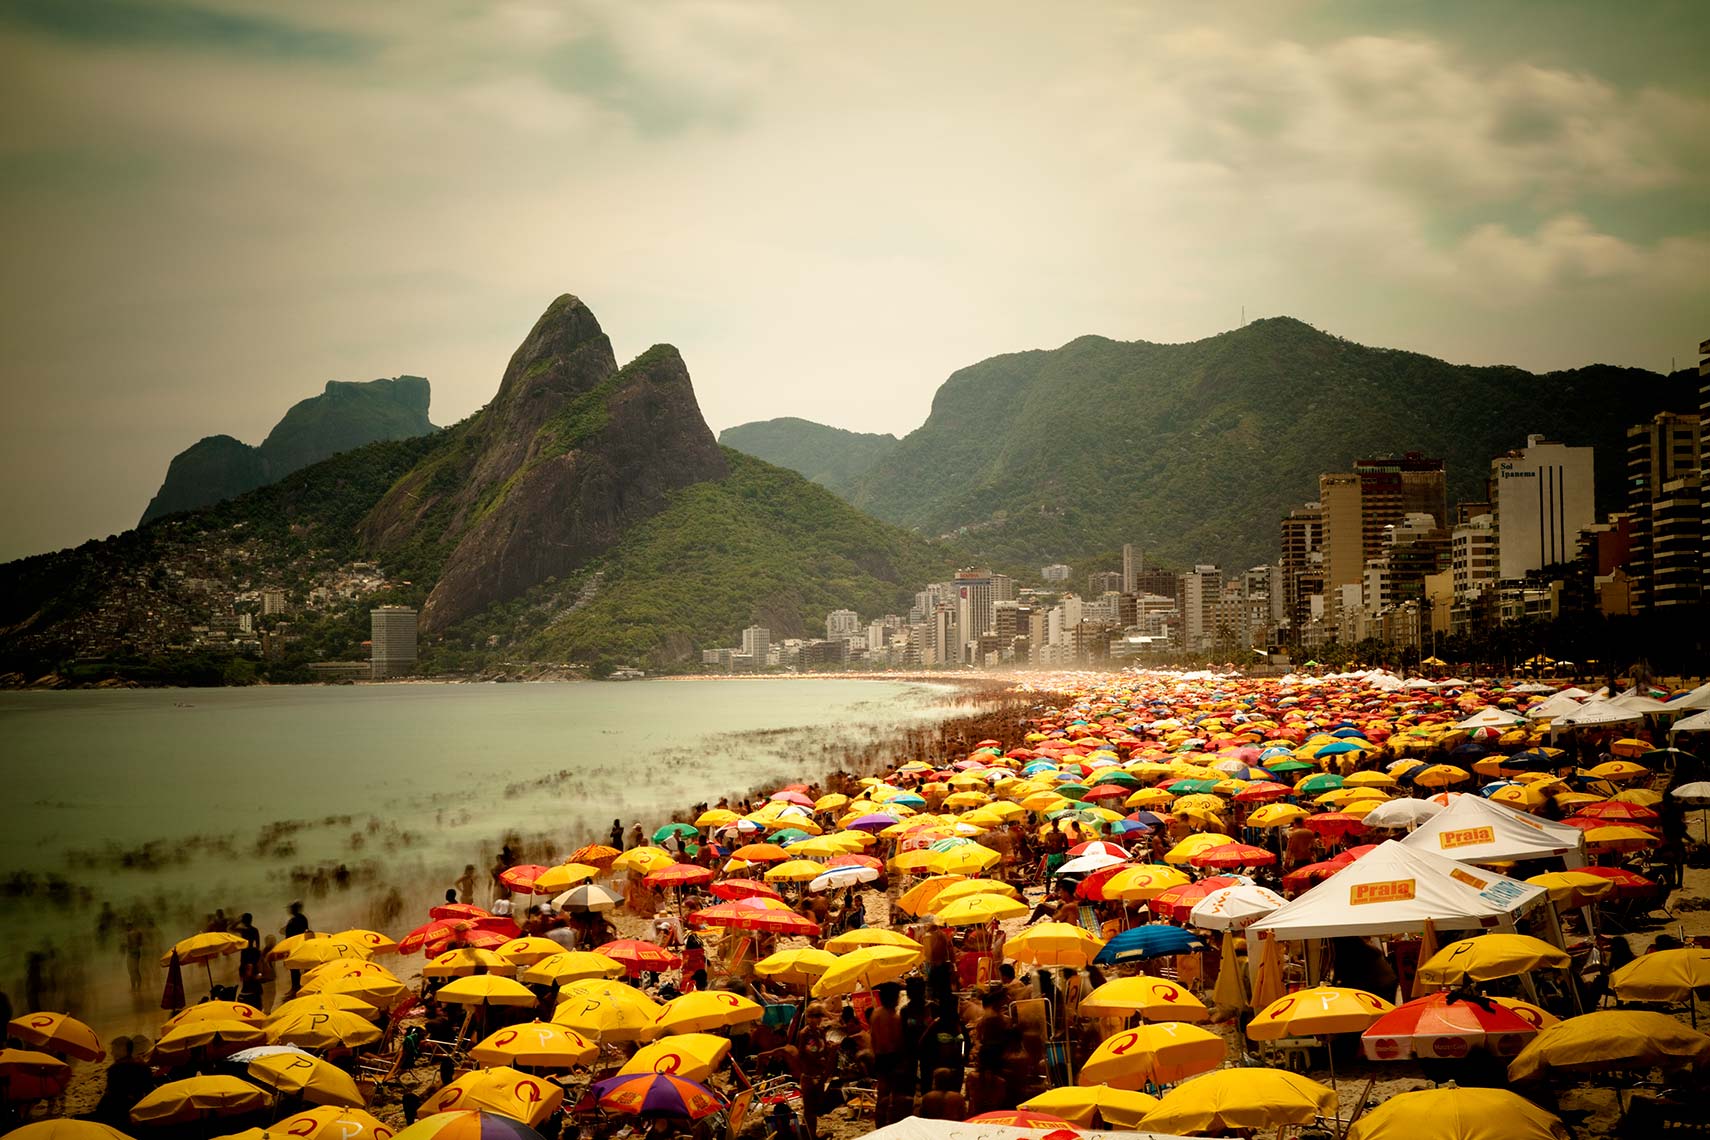 Ipanema, an affluent neighbourhood located in the South Zone of the city of Rio de Janeiro. Source Image: Brian Hodges Photography